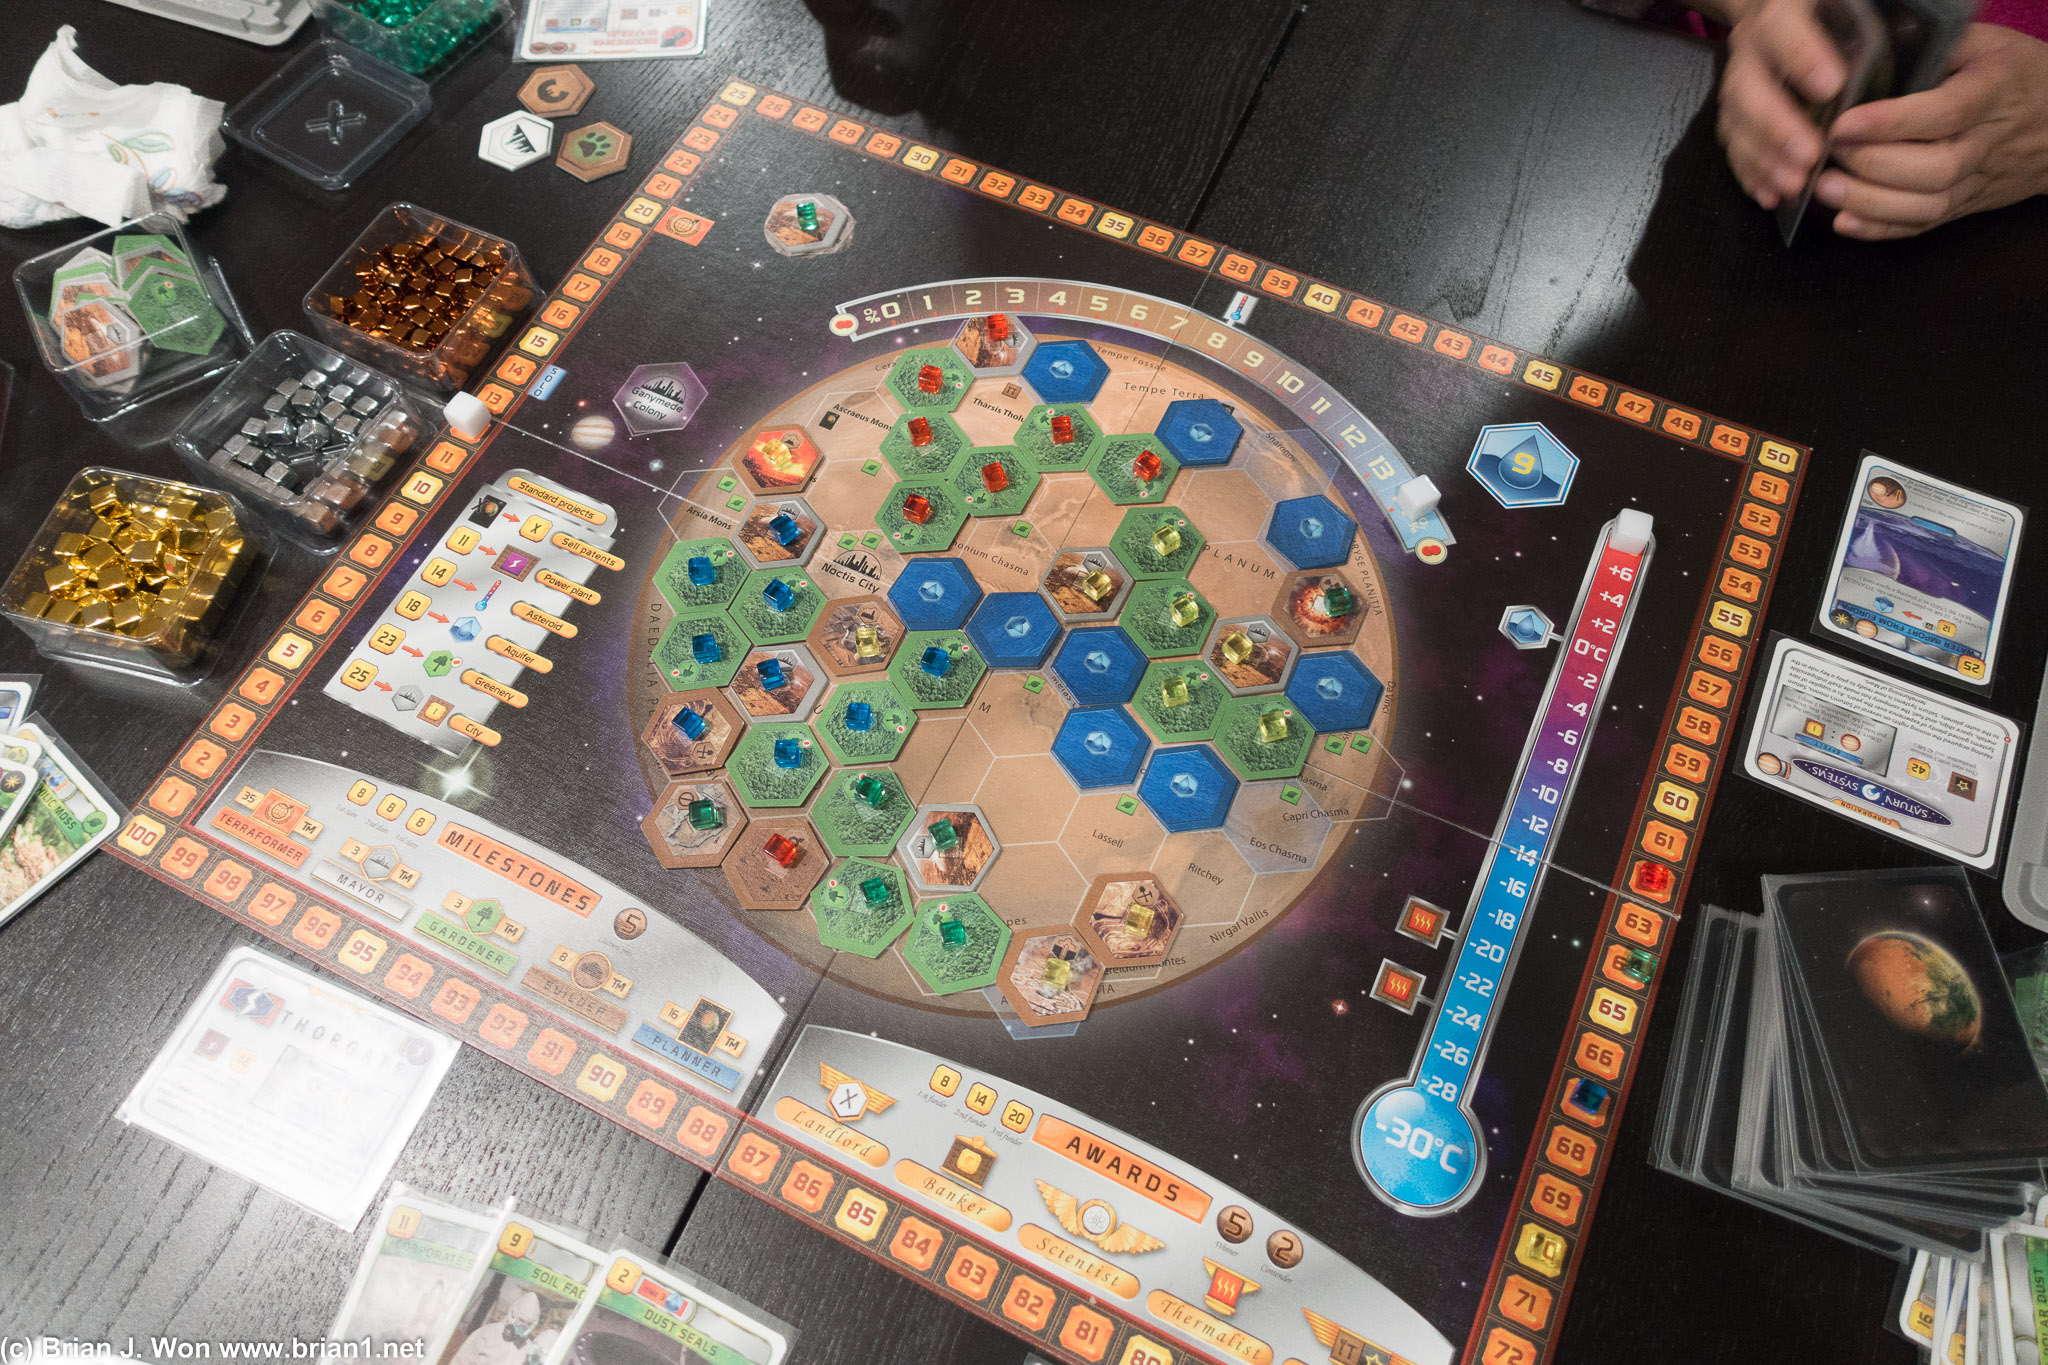 Introducing Christine and Chris to Terraforming Mars.